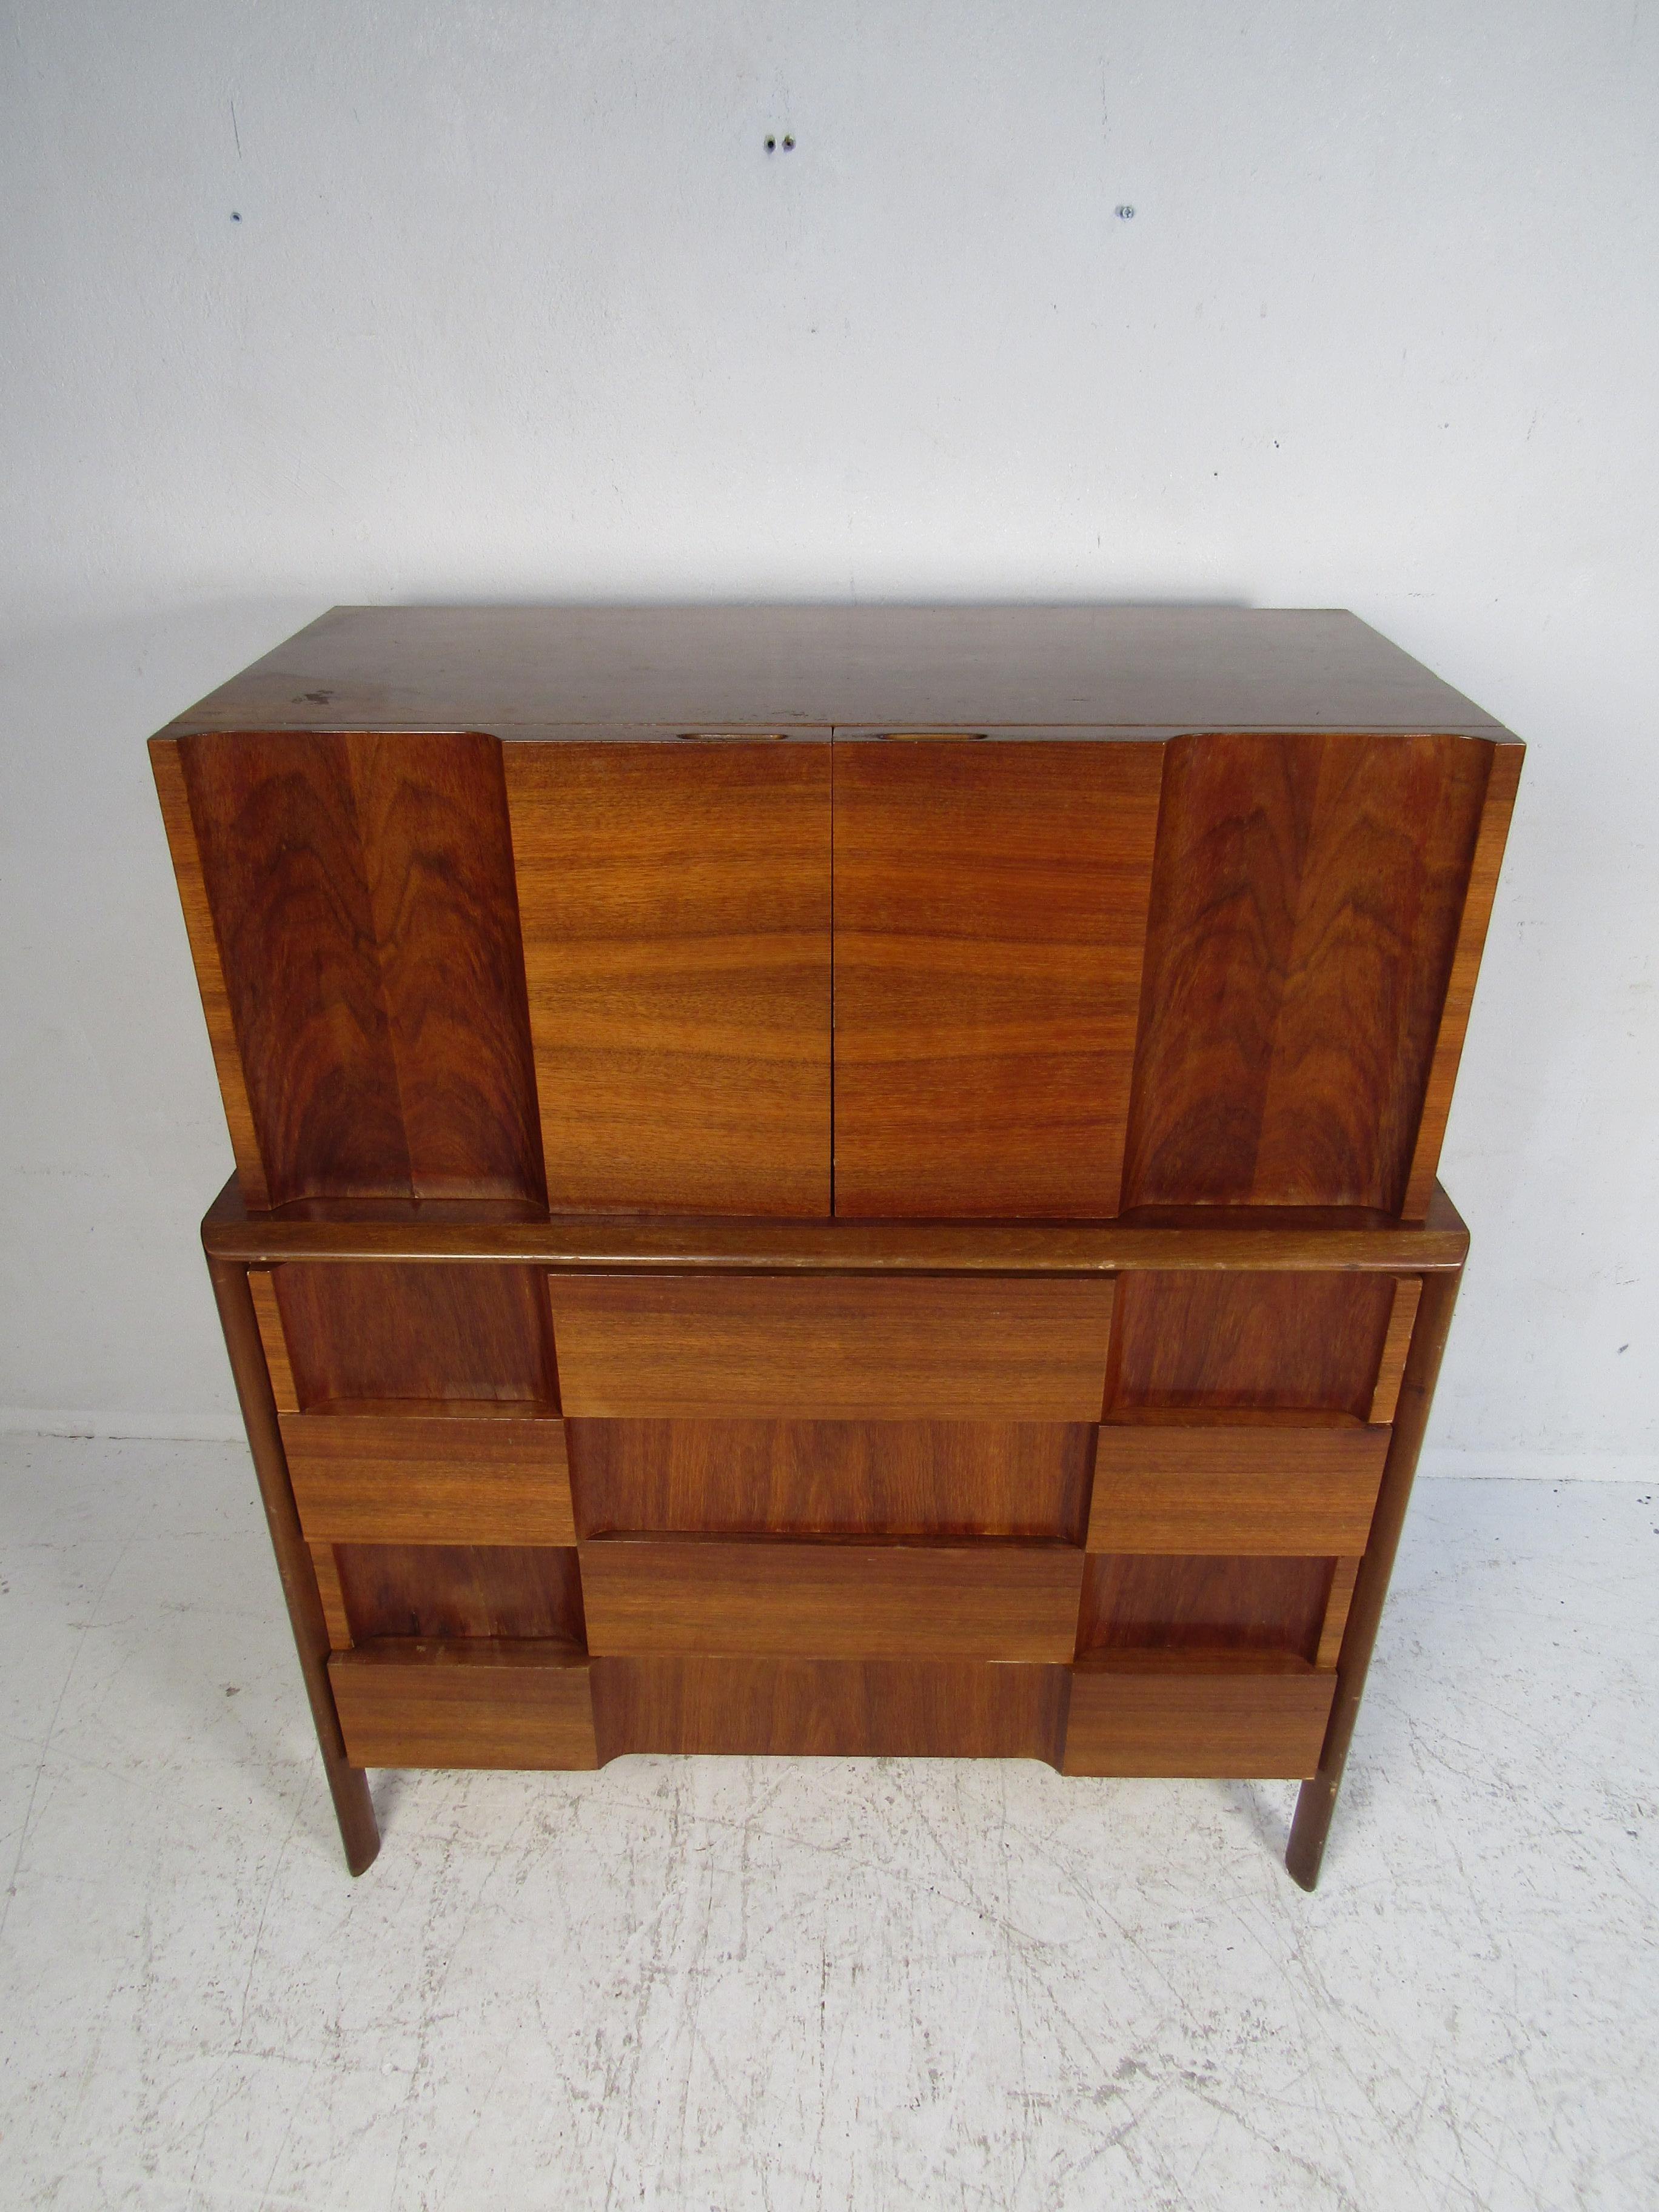 This stunning vintage modern bedroom set by Edmond Spence features the iconic checkerboard front. This set includes two nightstands, a low dresser, and a highboy dresser. An unusual design that offers plenty of room for storage within its many